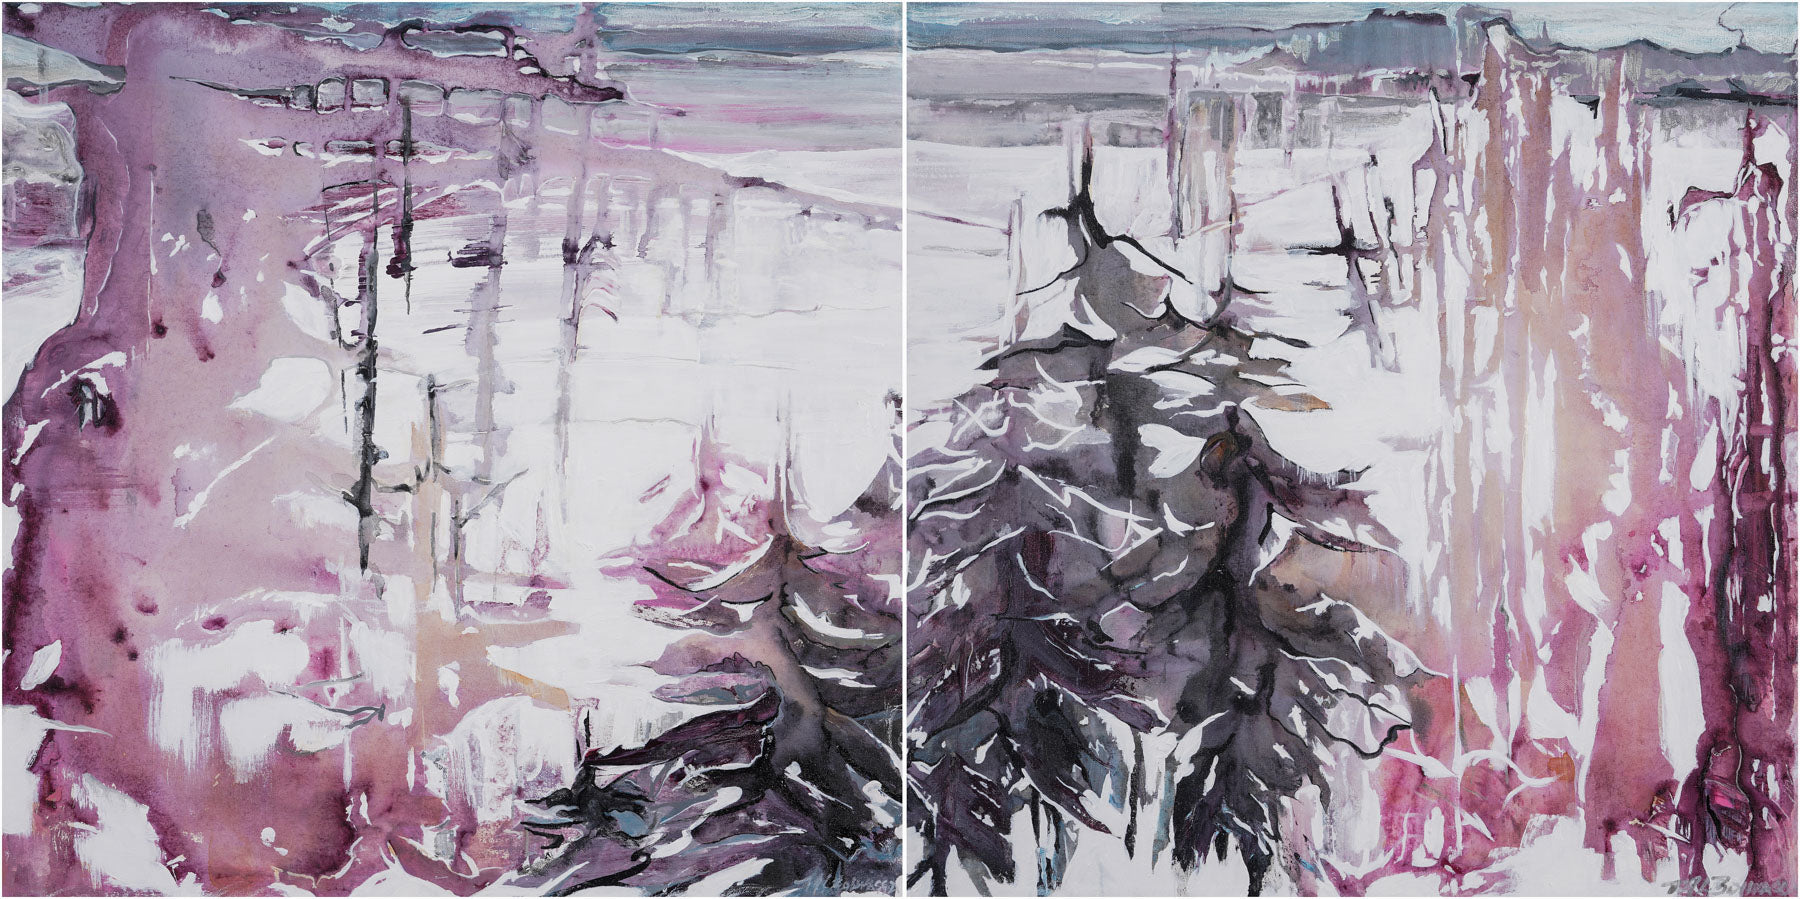 Haunted - "Path among trees" Collection, 24"x24" (Diptyque / Diptych)